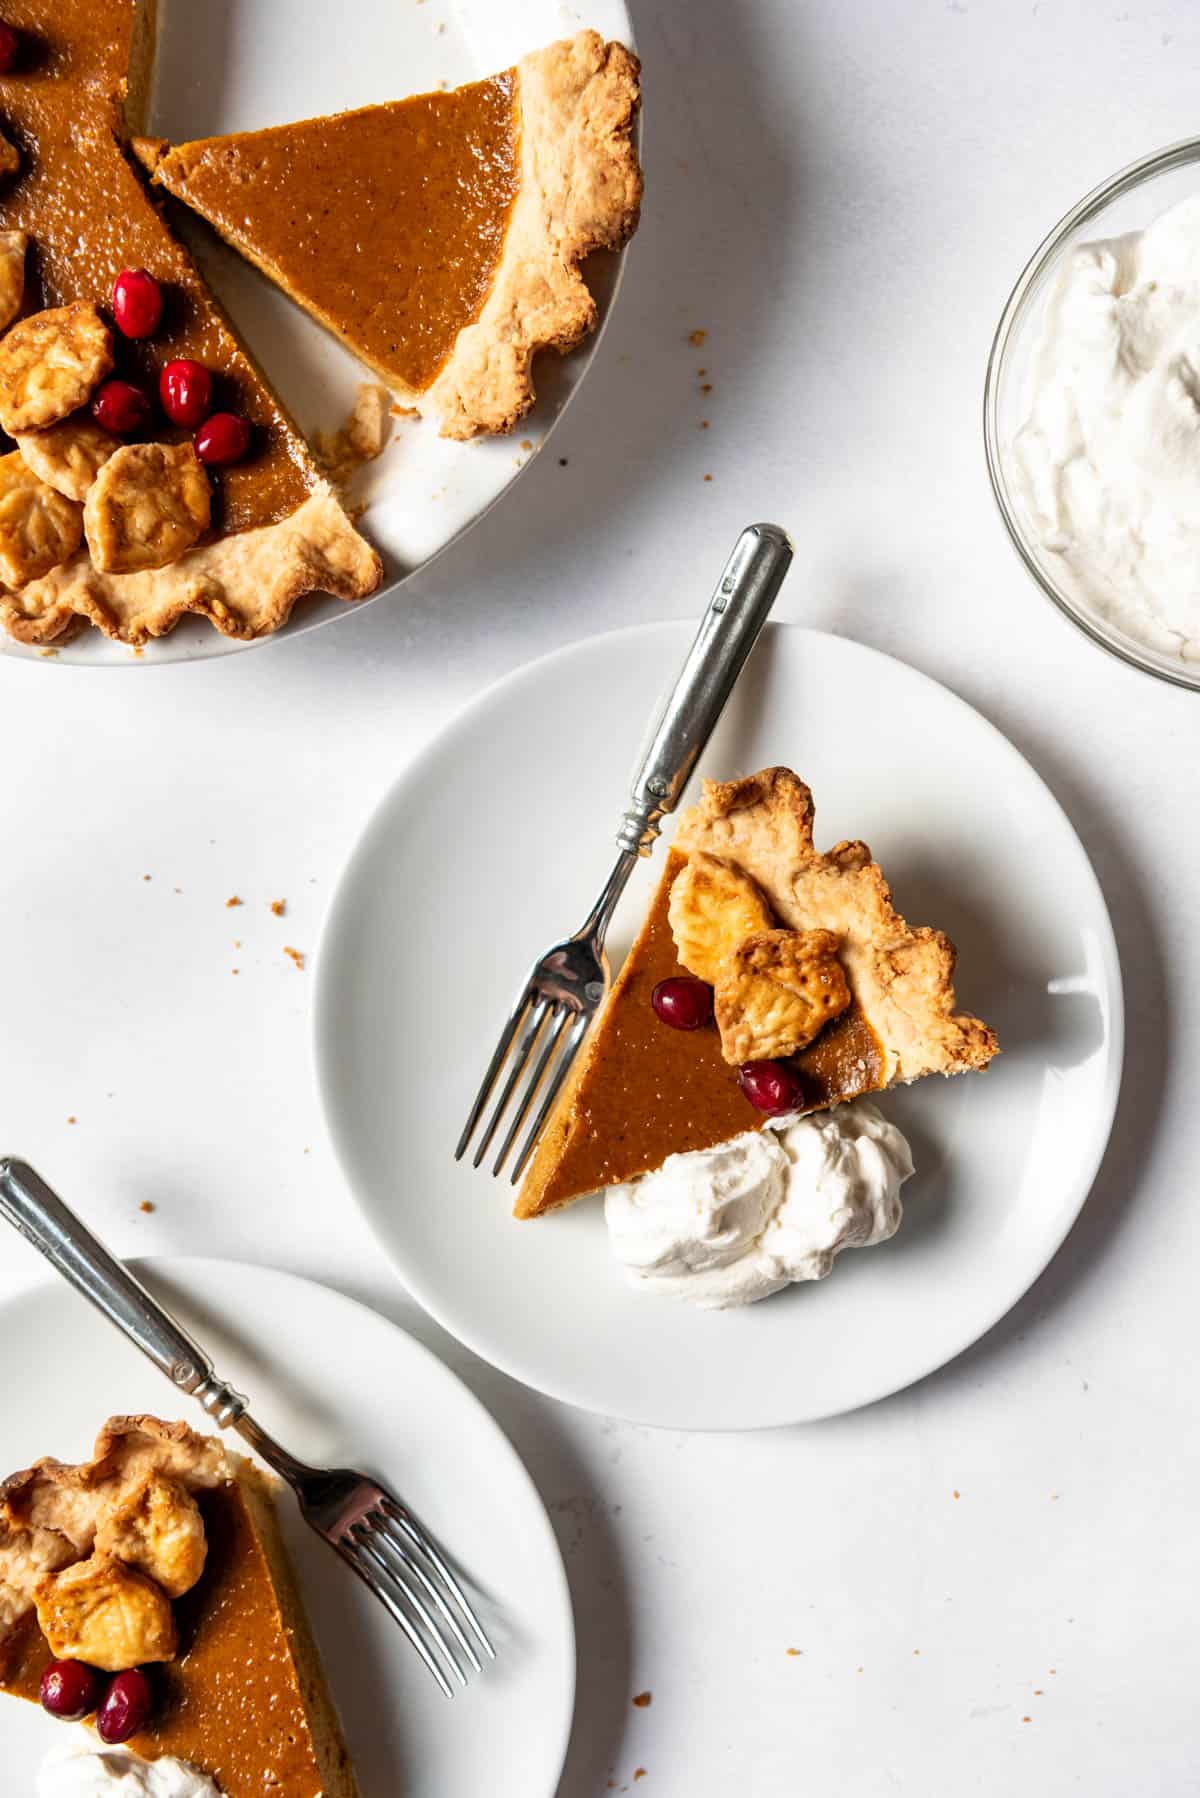 An image of a slice of homemade pumpkin pie on a plate with whipped cream on the side.